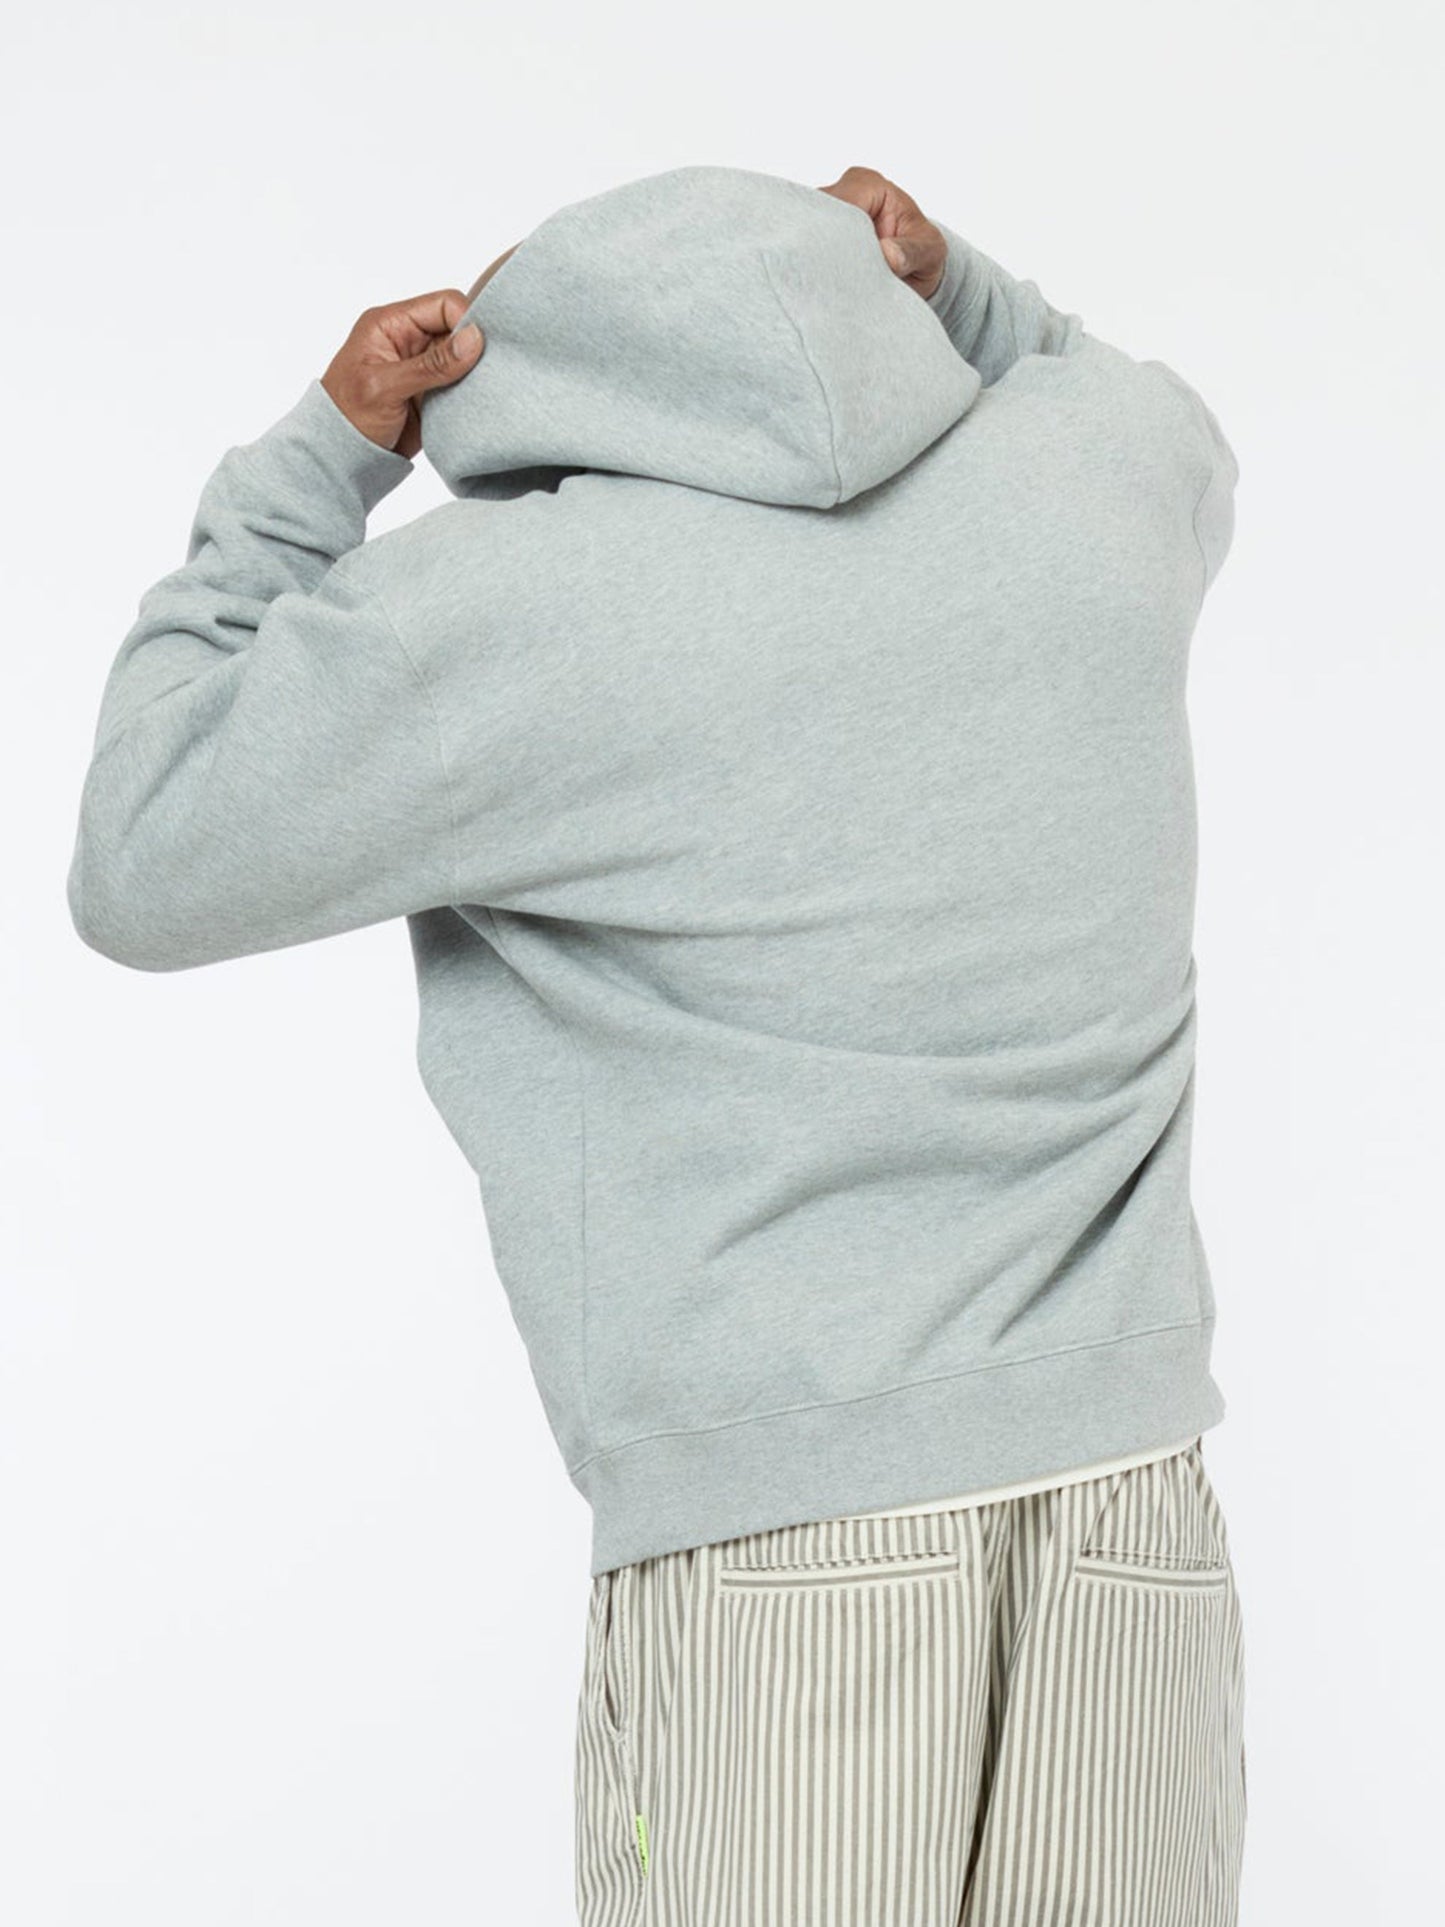 Inside Out Hoodie (Heather Grey)